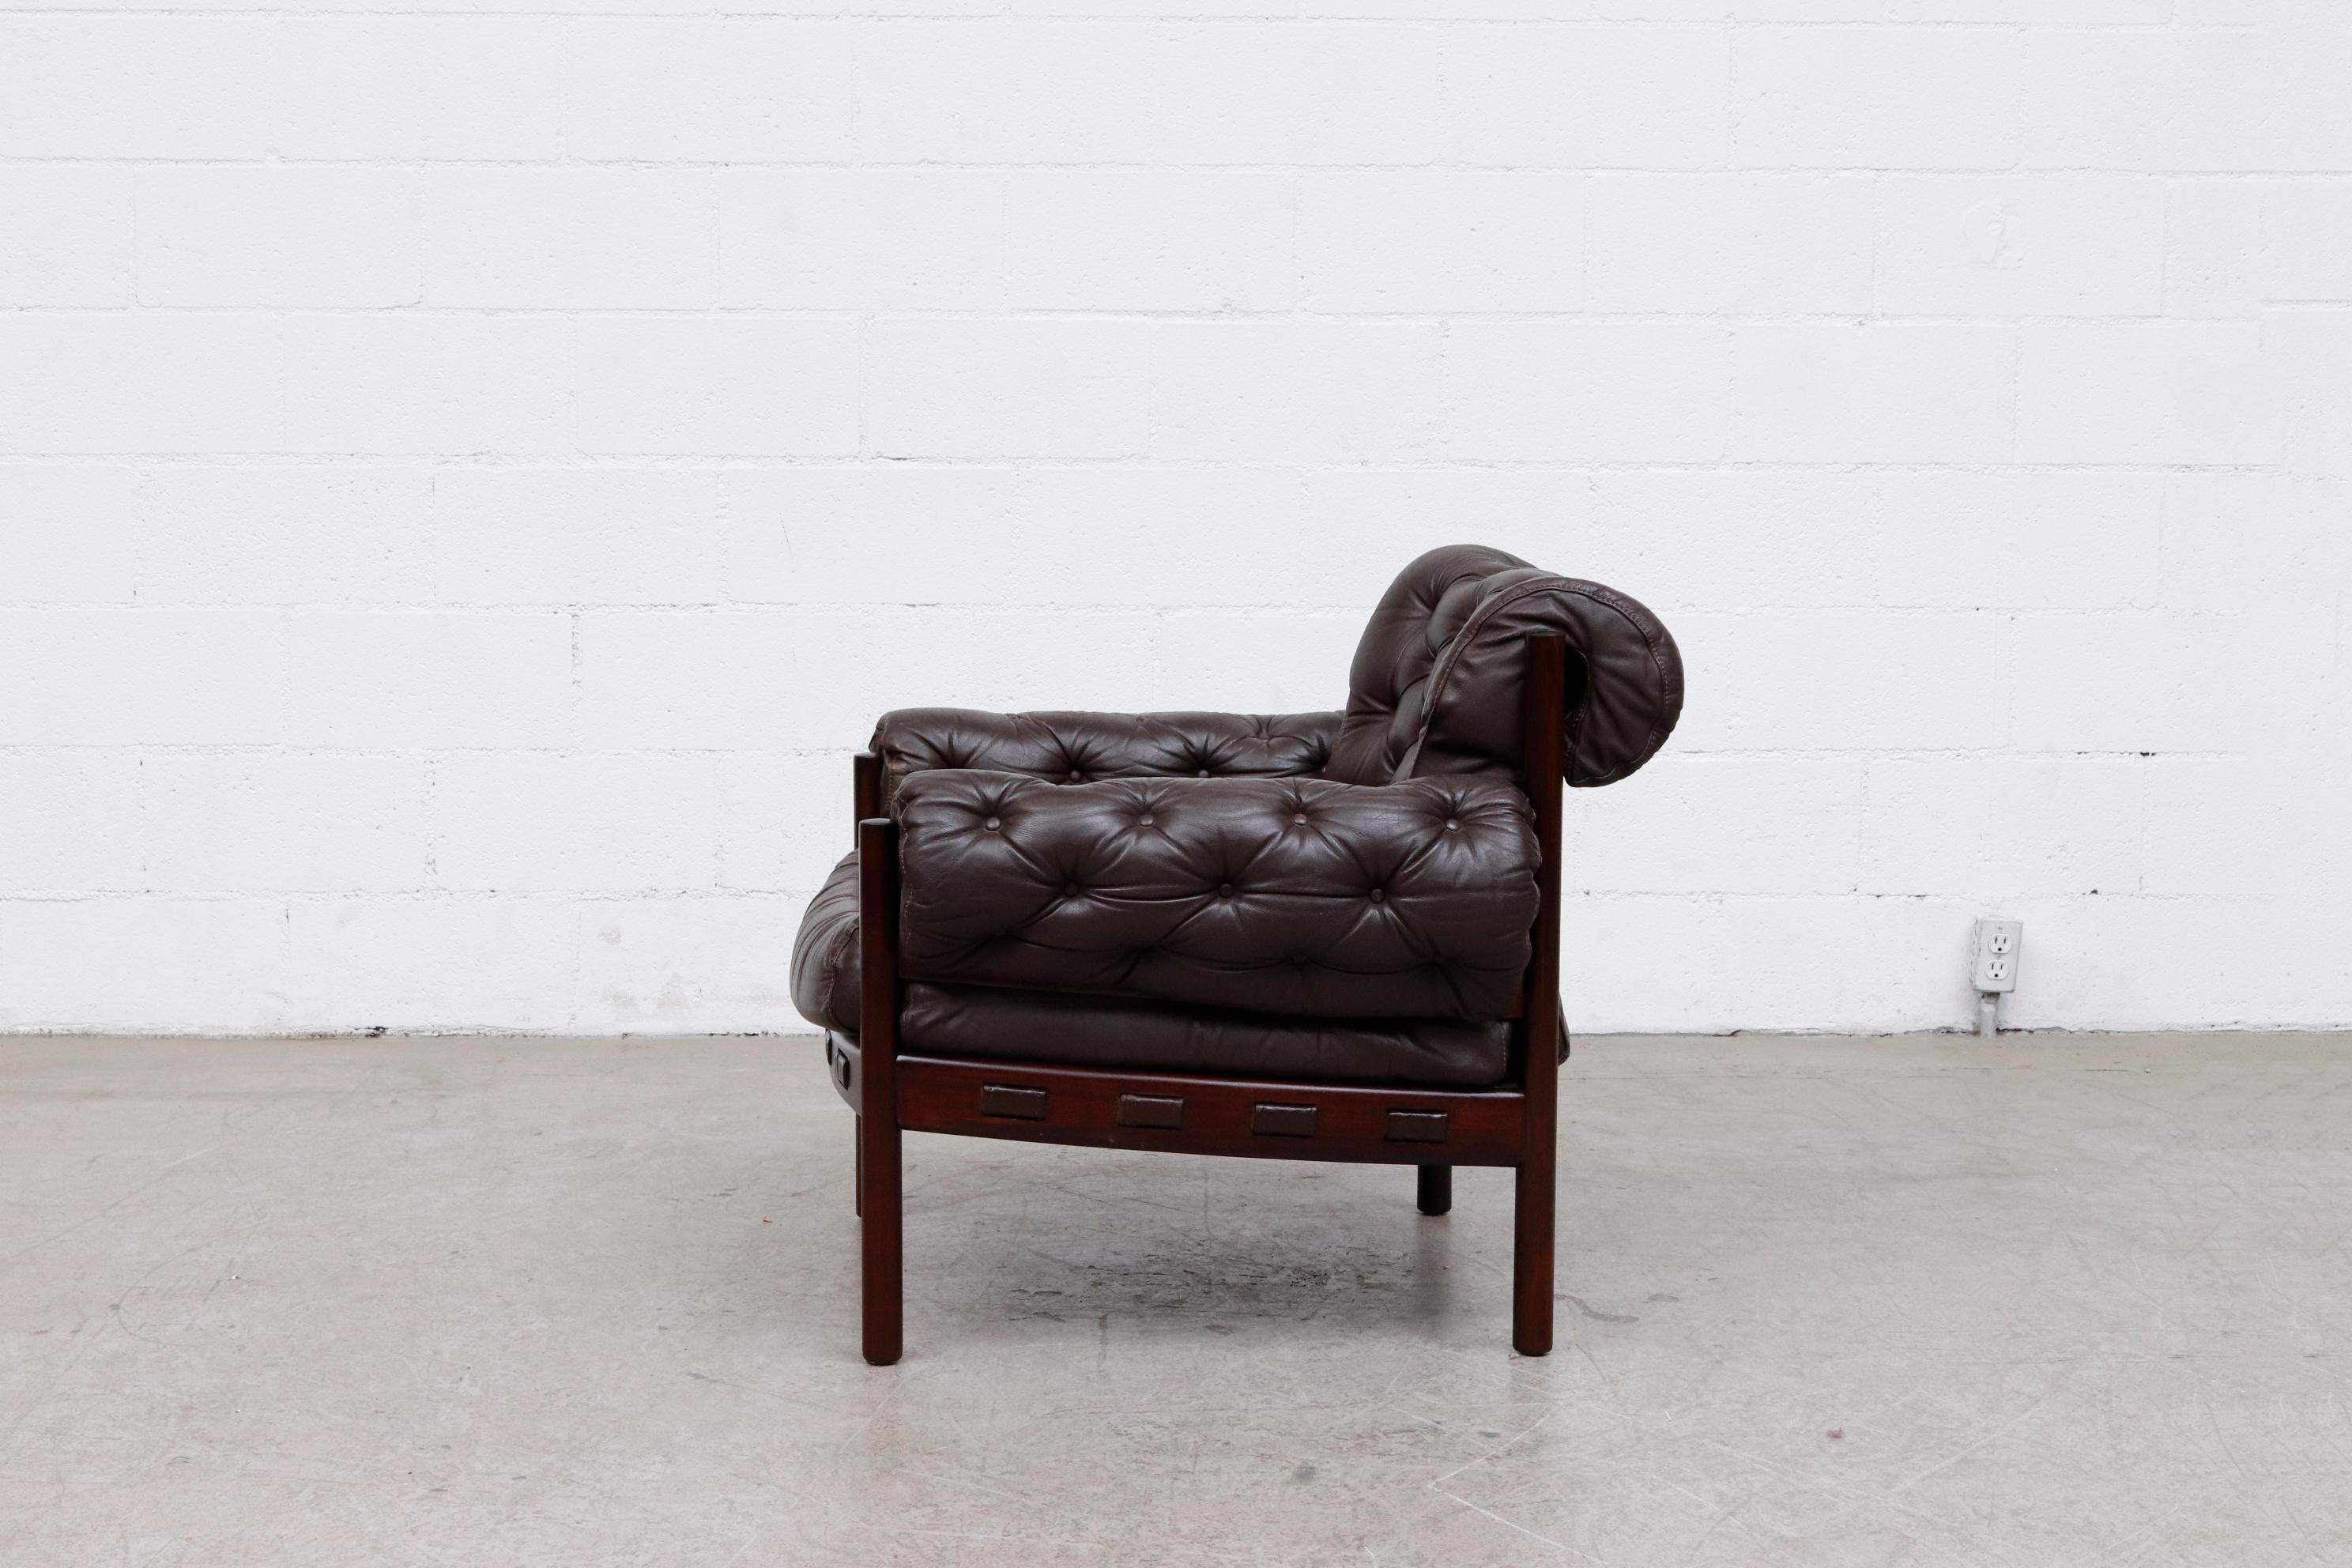 Mid-Century Modern Arne Norell Style Tufted Leather Lounge Chair by Sven Ellekaer for Coja